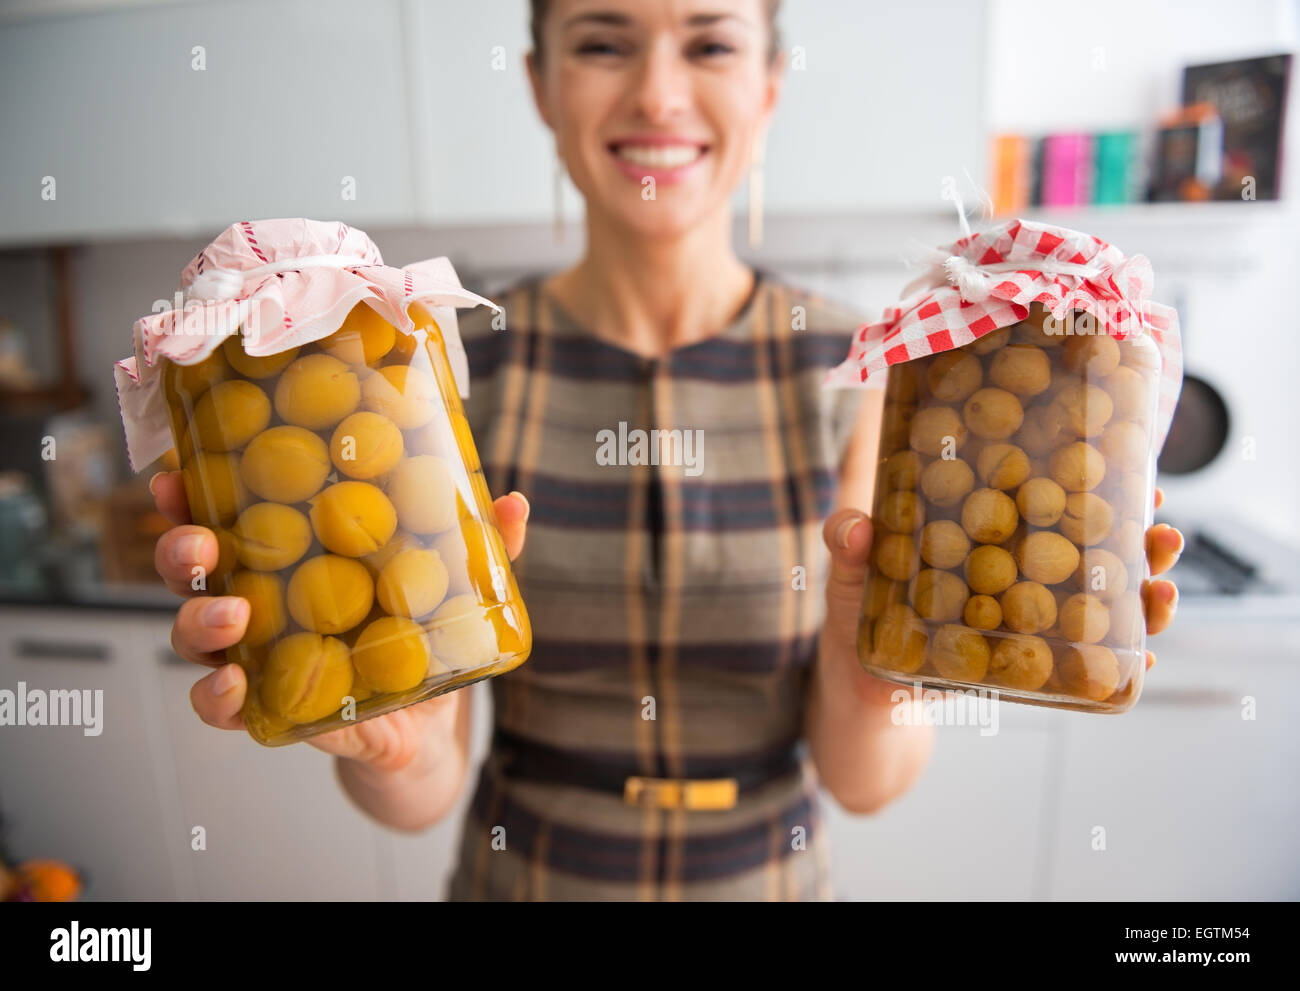 Closeup on young housewife showing jars with homemade gooseberry and plum compote Stock Photo